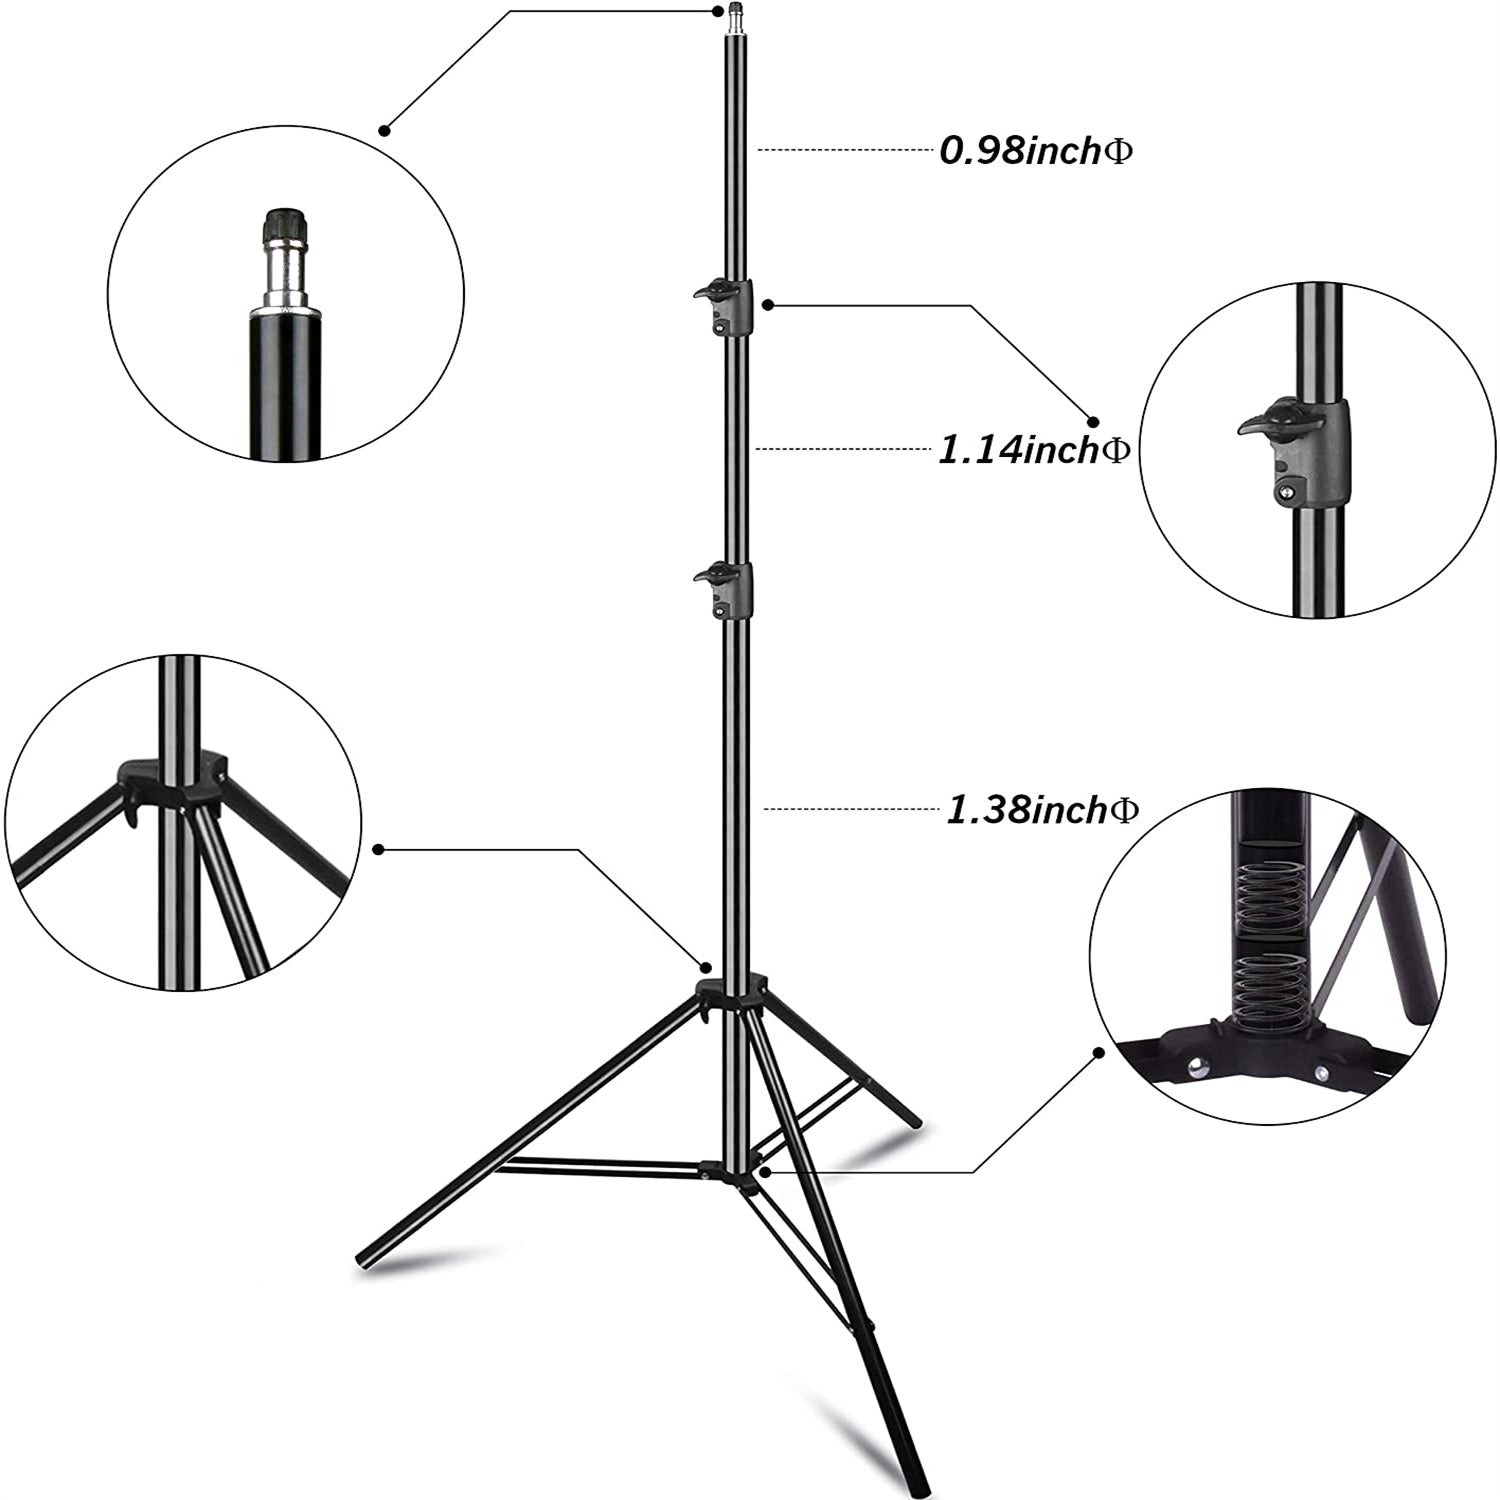 EMART 20x10ft Photo Video Studio Adjustable Heavy Duty Photography Backdrop Stand, Background Support System Kit